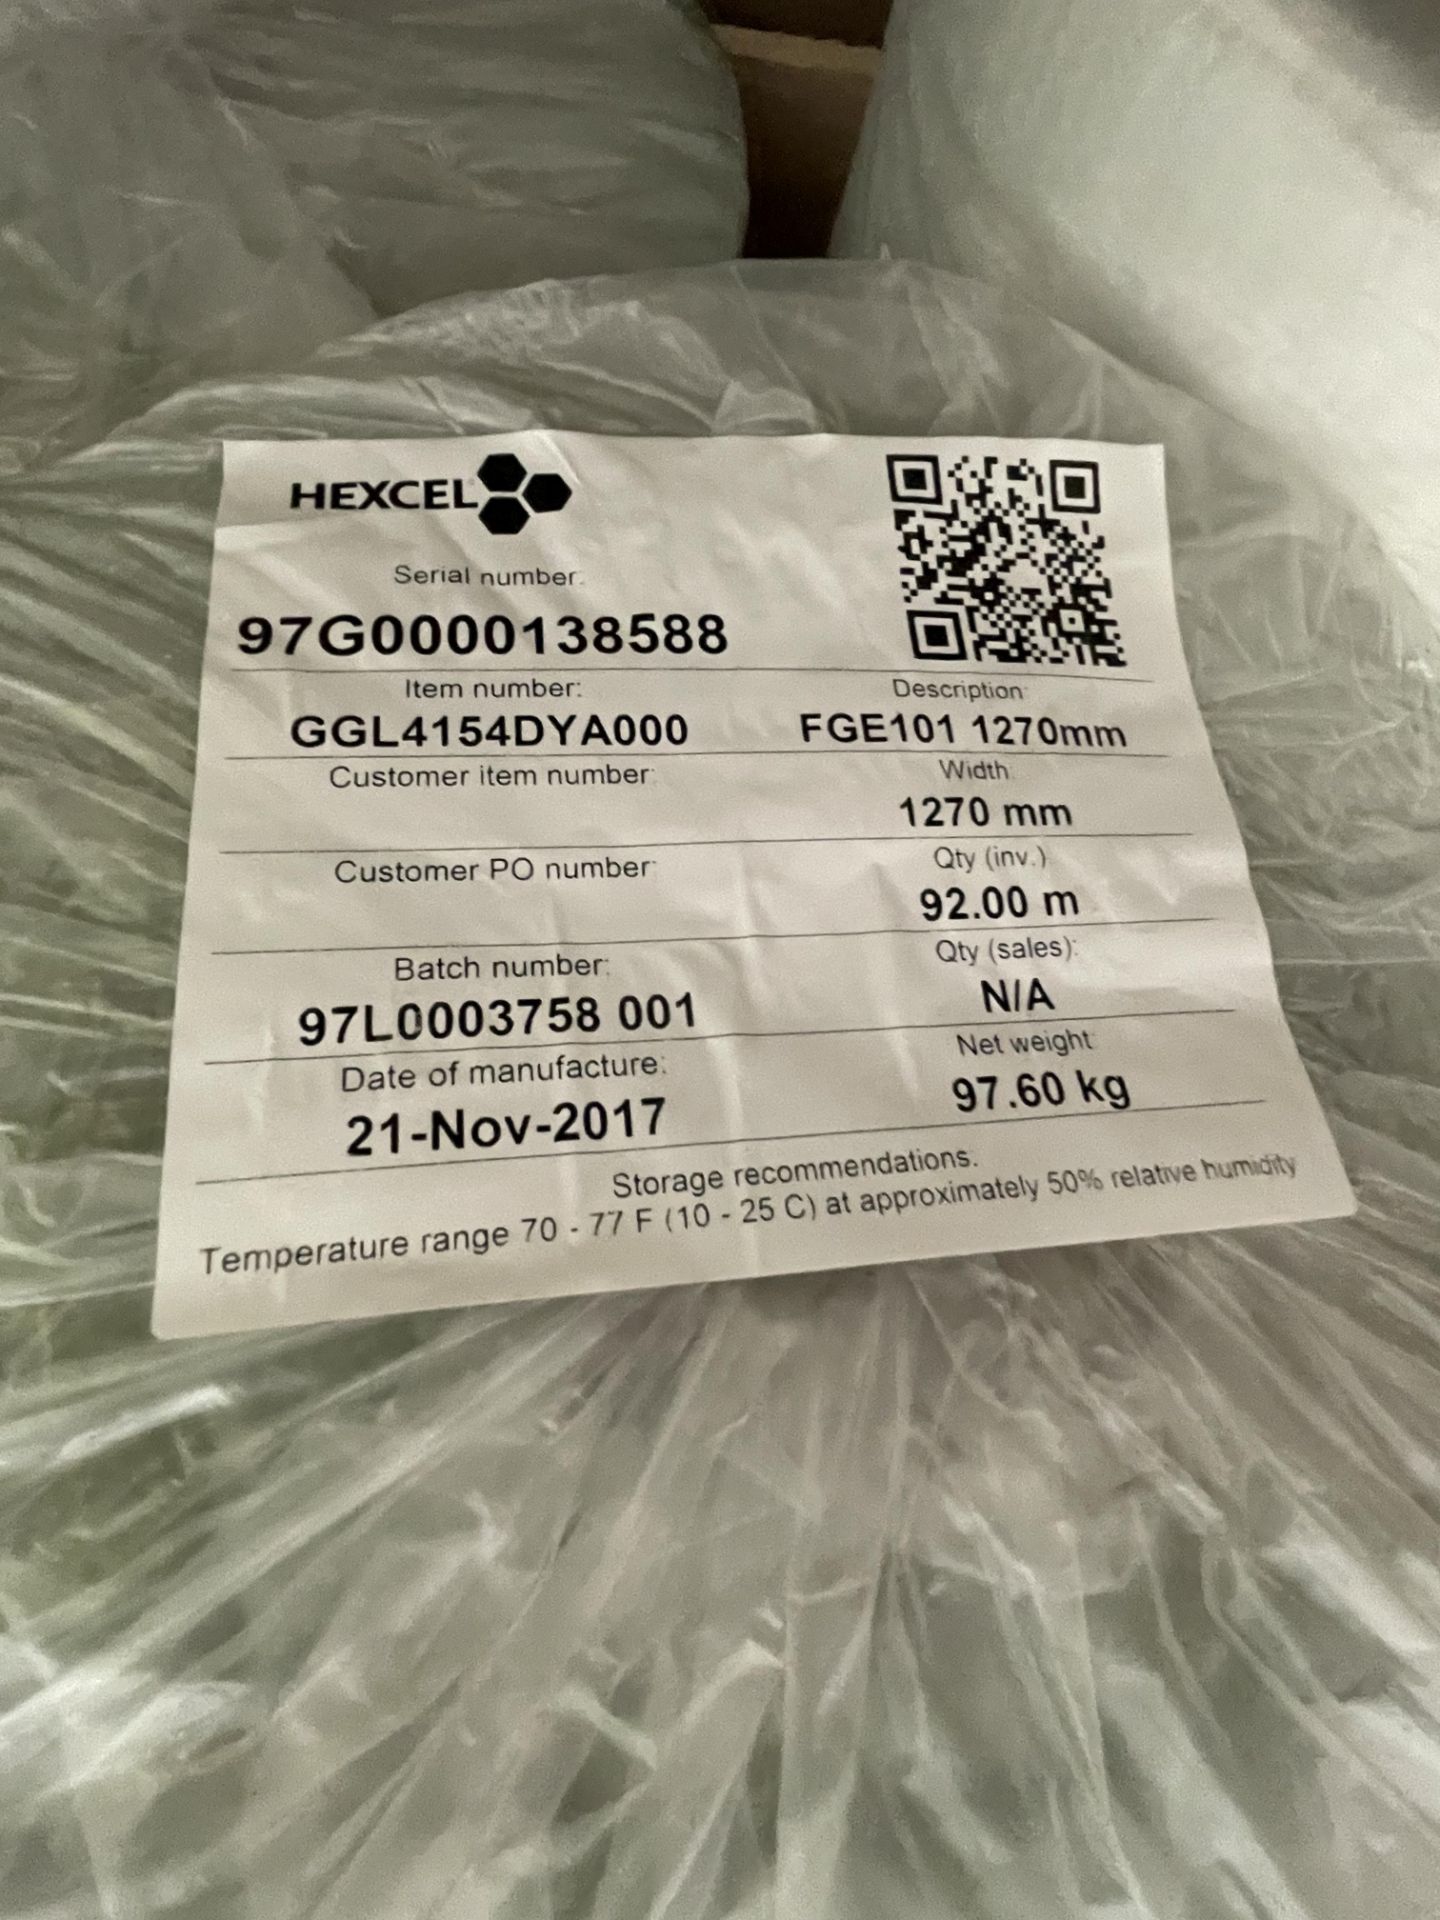 6x Rolls of Hexcel FGE101 1270mm Width, Date of Manufacture: 21-Nov-2017 Batch No. 97L0003758001 - Image 3 of 3